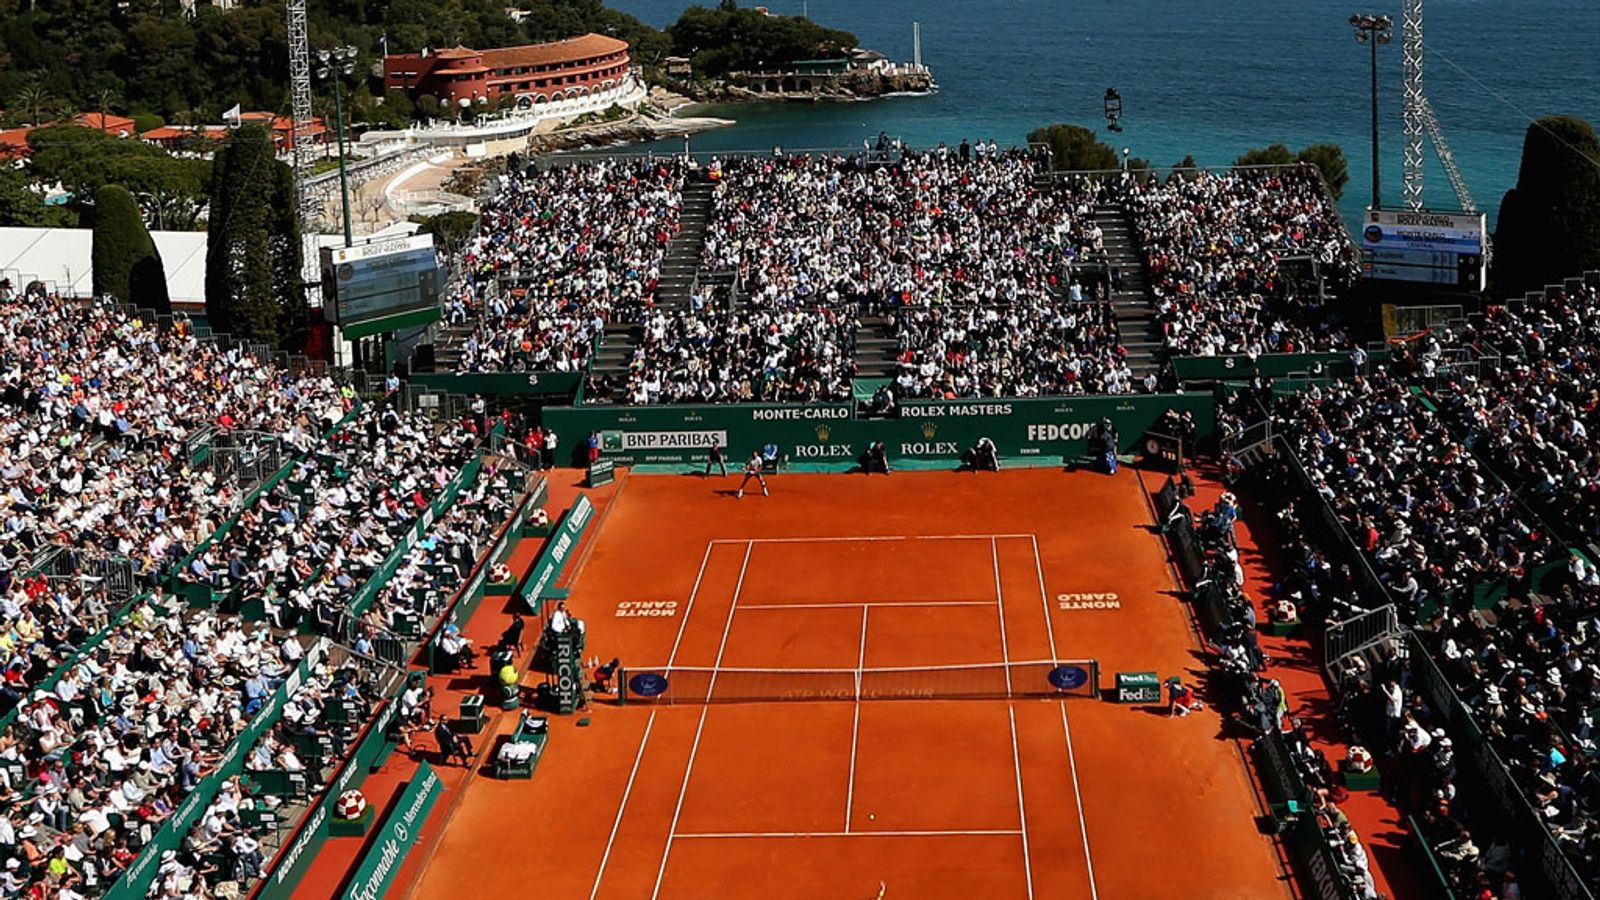 monte carlo tennis results today